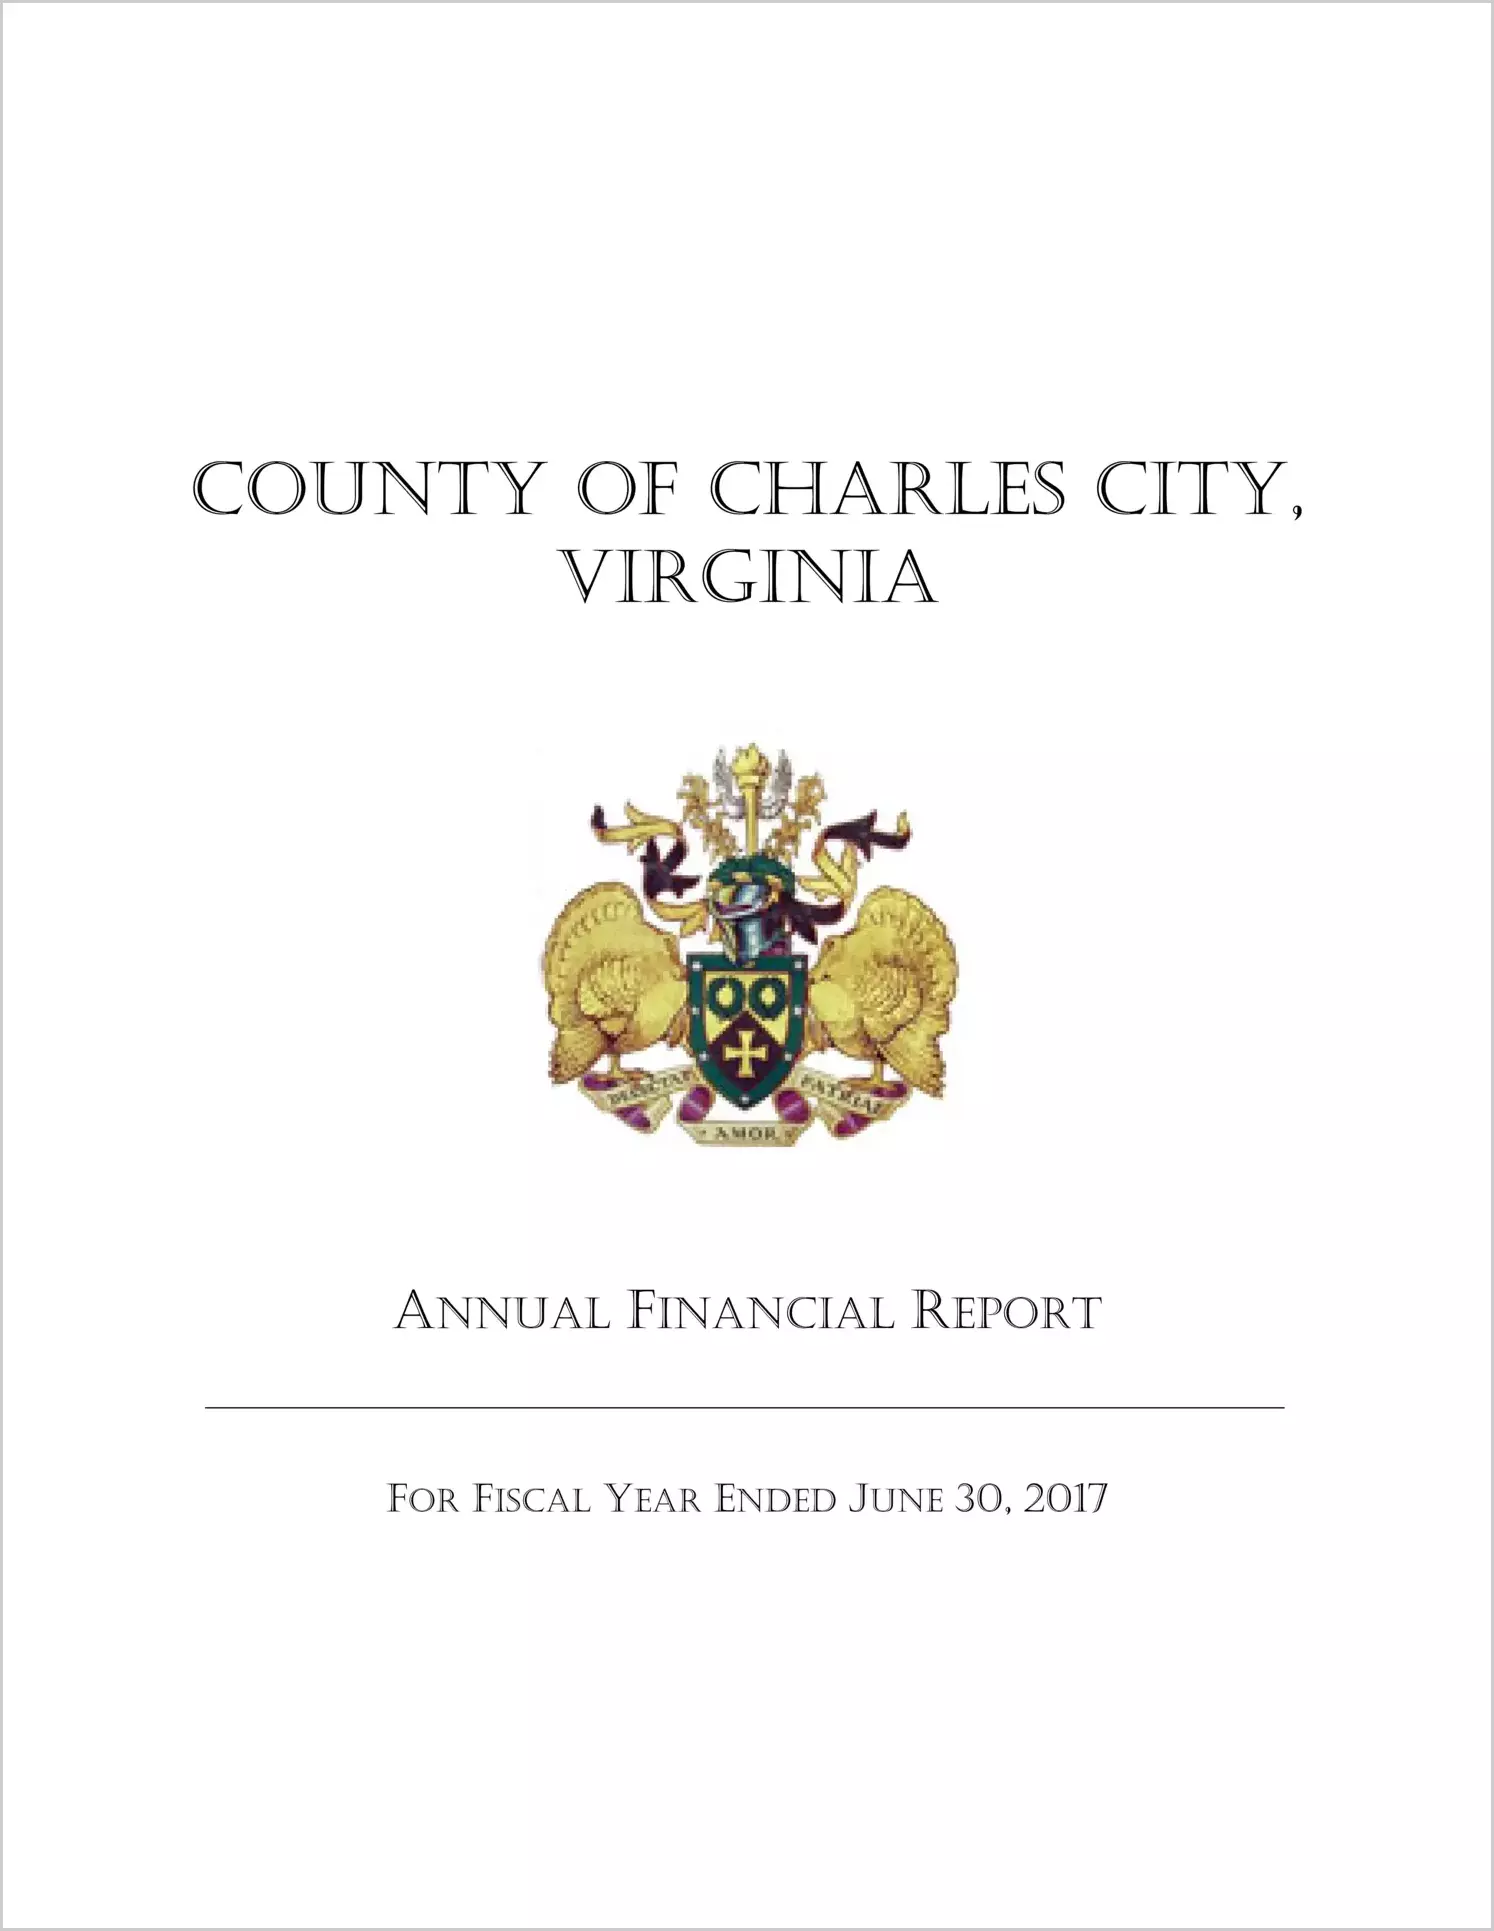 2017 Annual Financial Report for County of Charles City